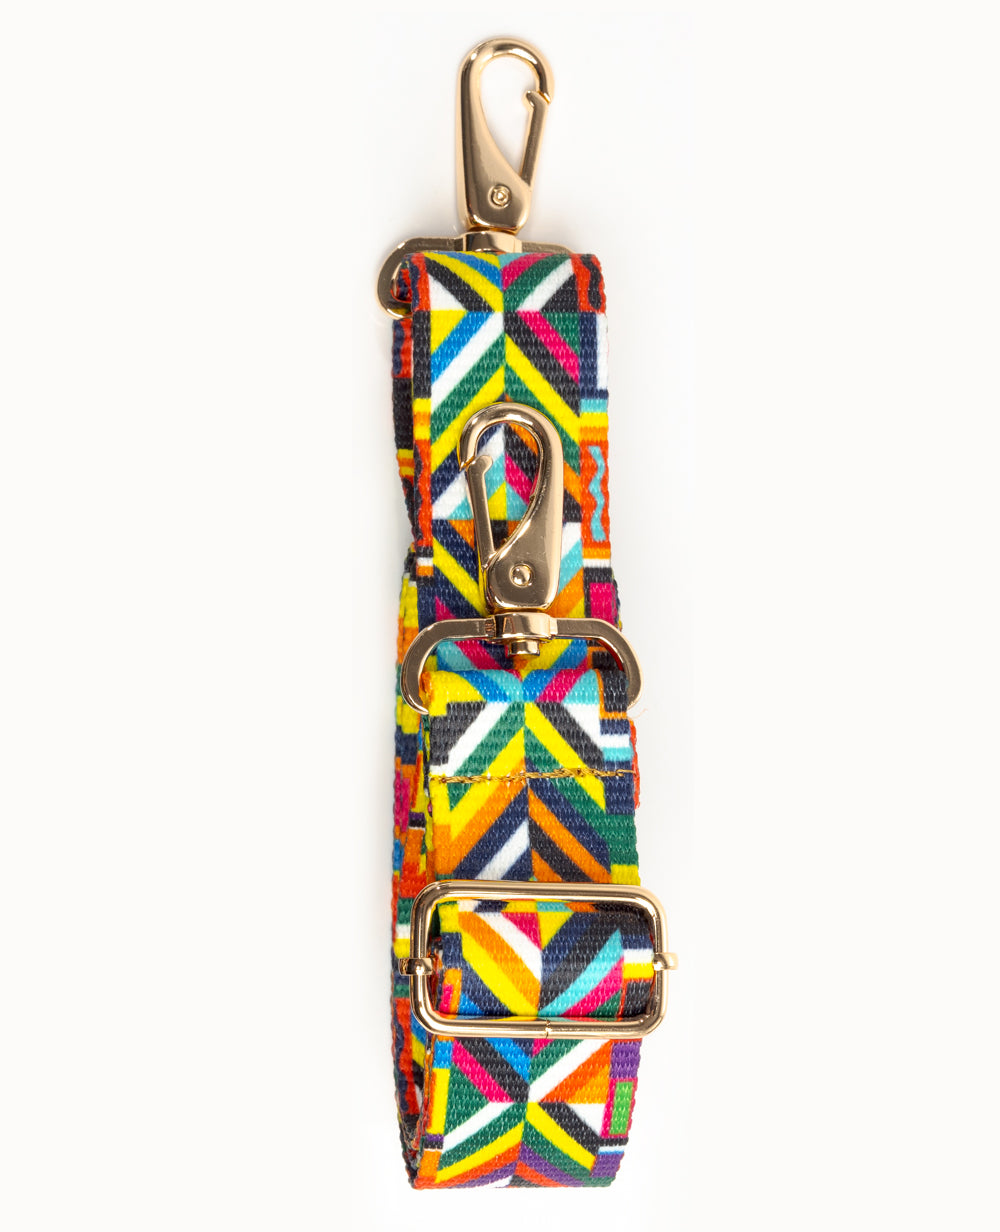 Rainbow geometric patterned purse strap with gold hardware